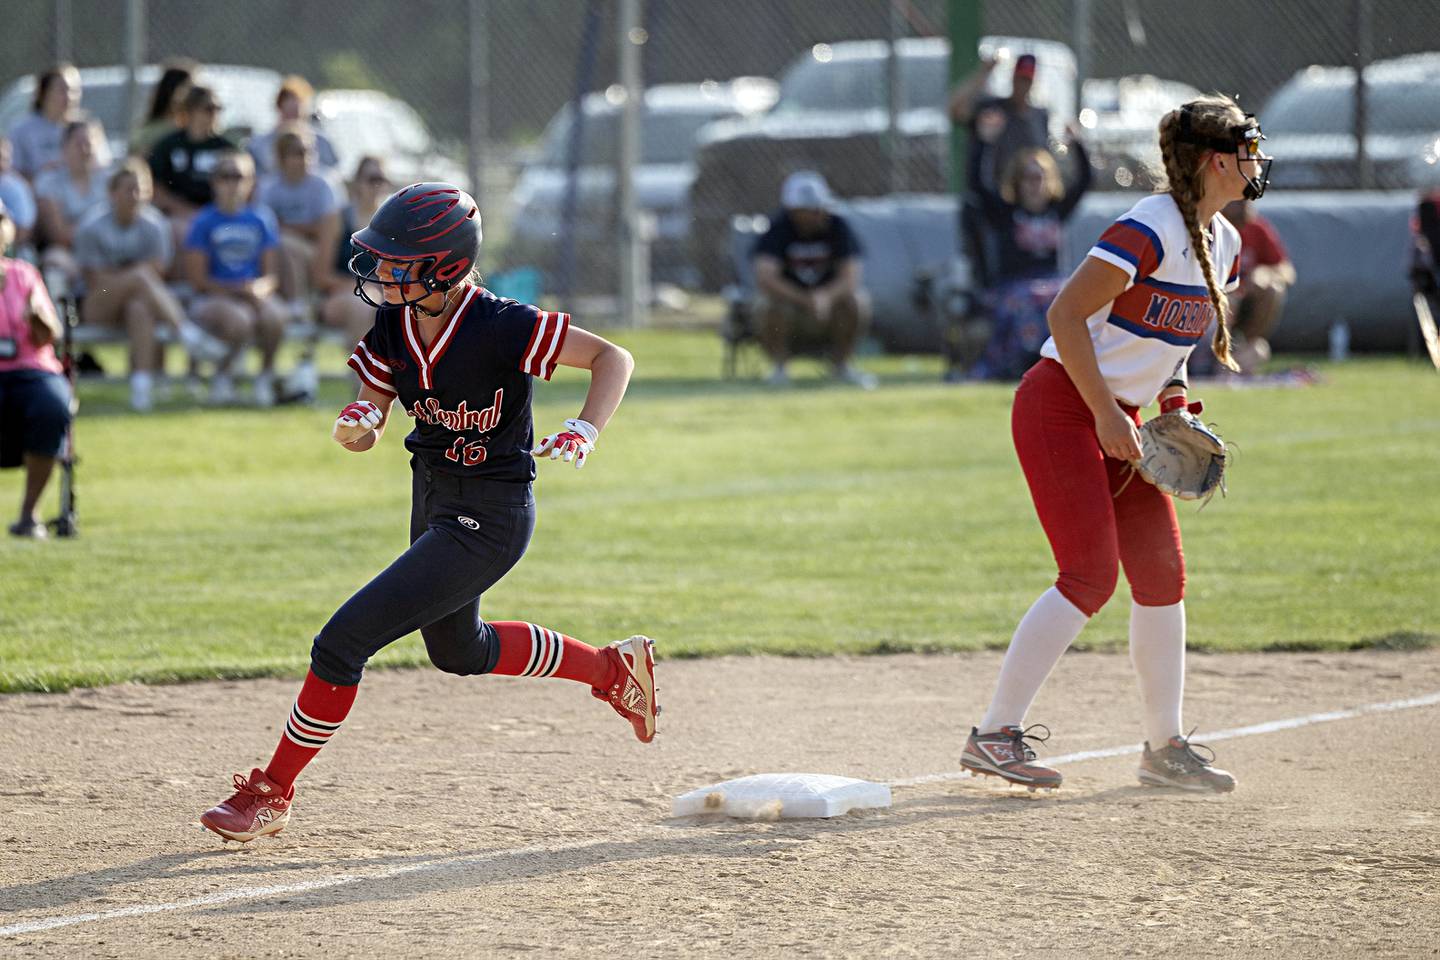 West Central’s Bailie Ferguson rounds third to score the only run of the game against Morrison on Wednesday, May 24, 2023 during their Class 1A sectional semifinal at St. Bede Academy.